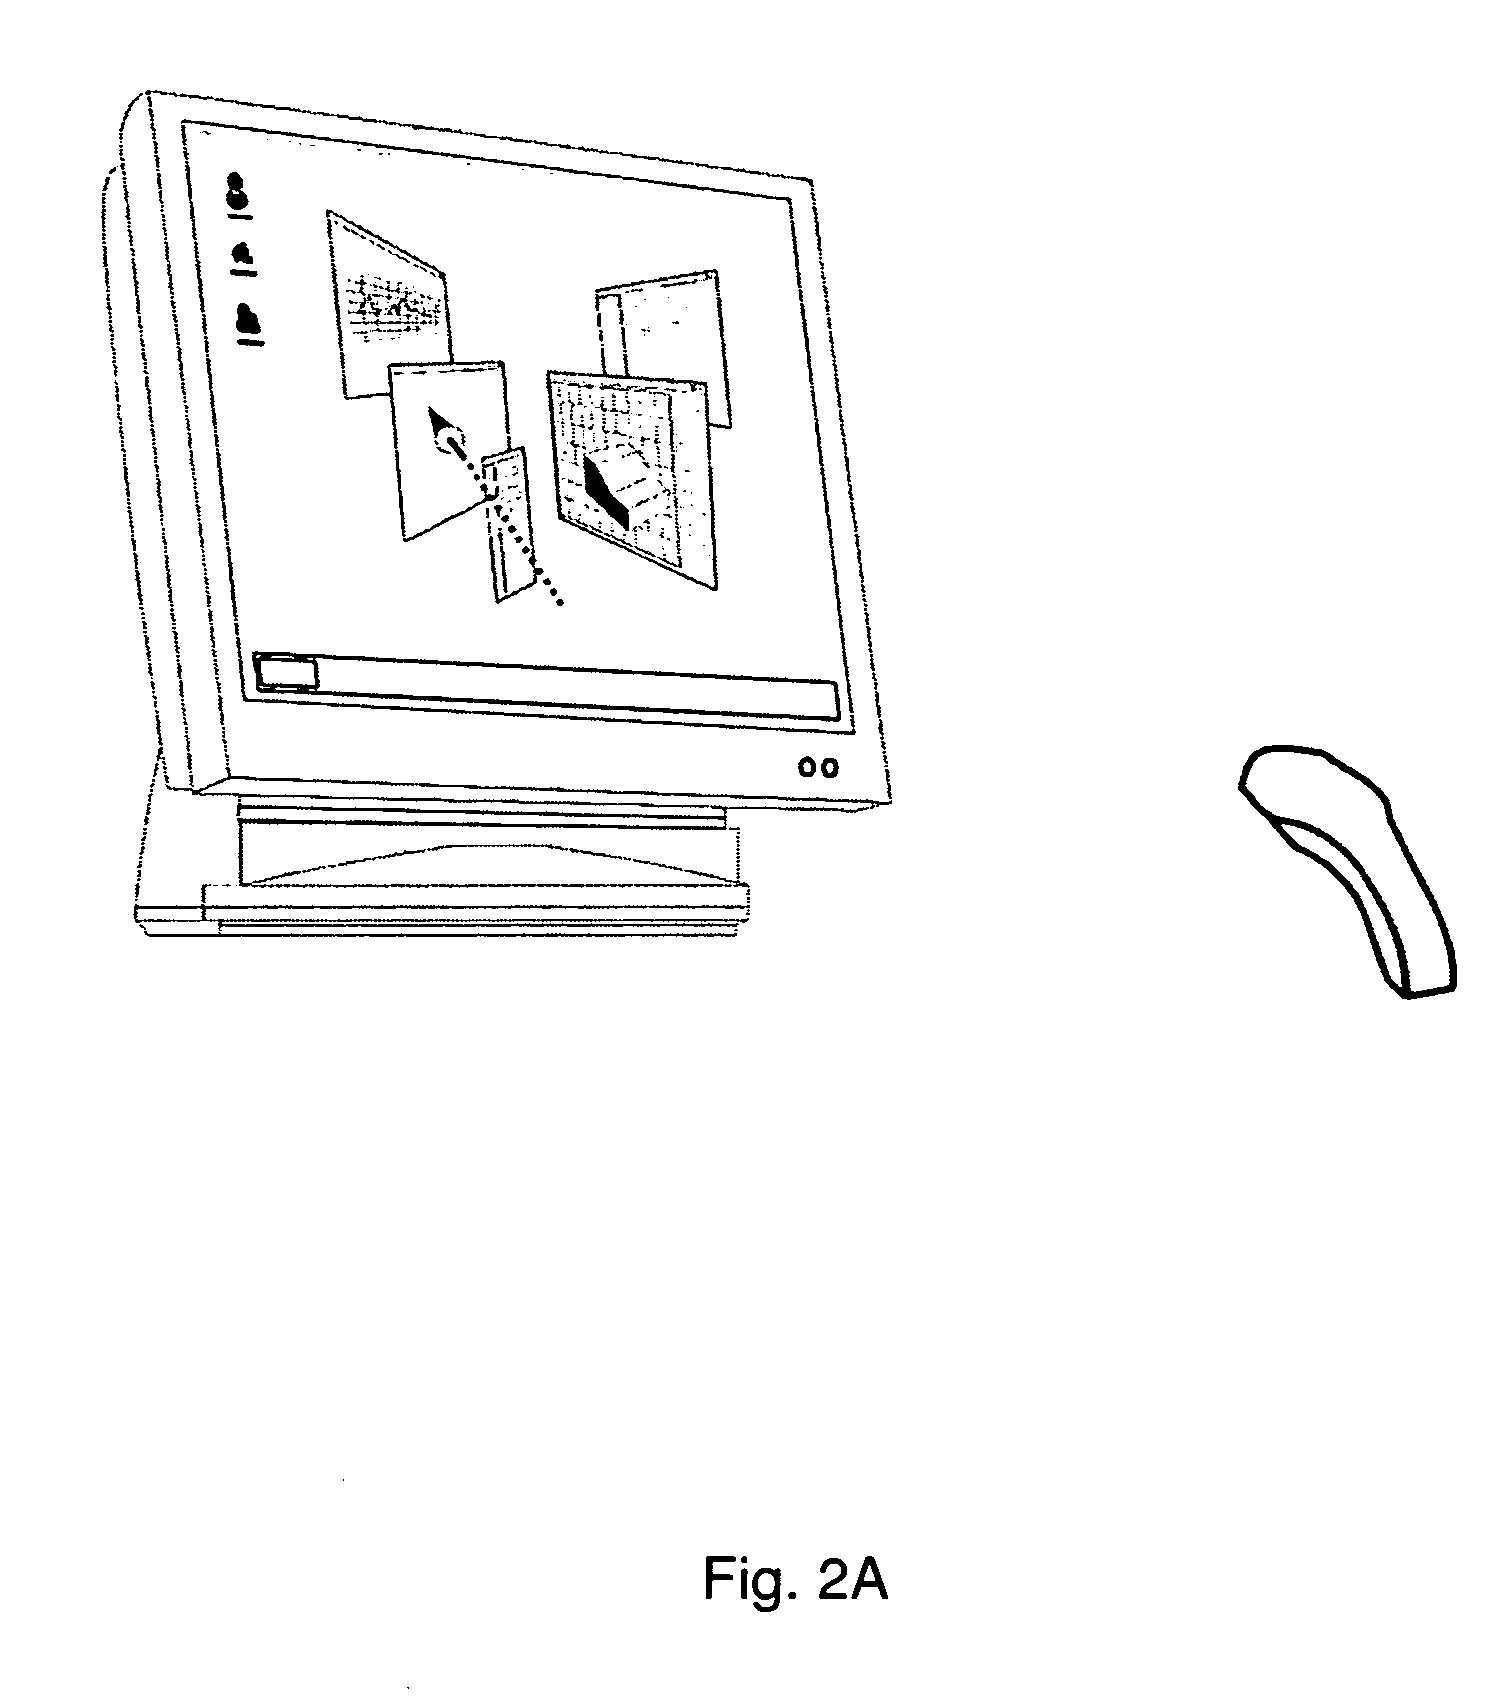 Hand-held wireless electronic device with accelerometer for interacting with a display